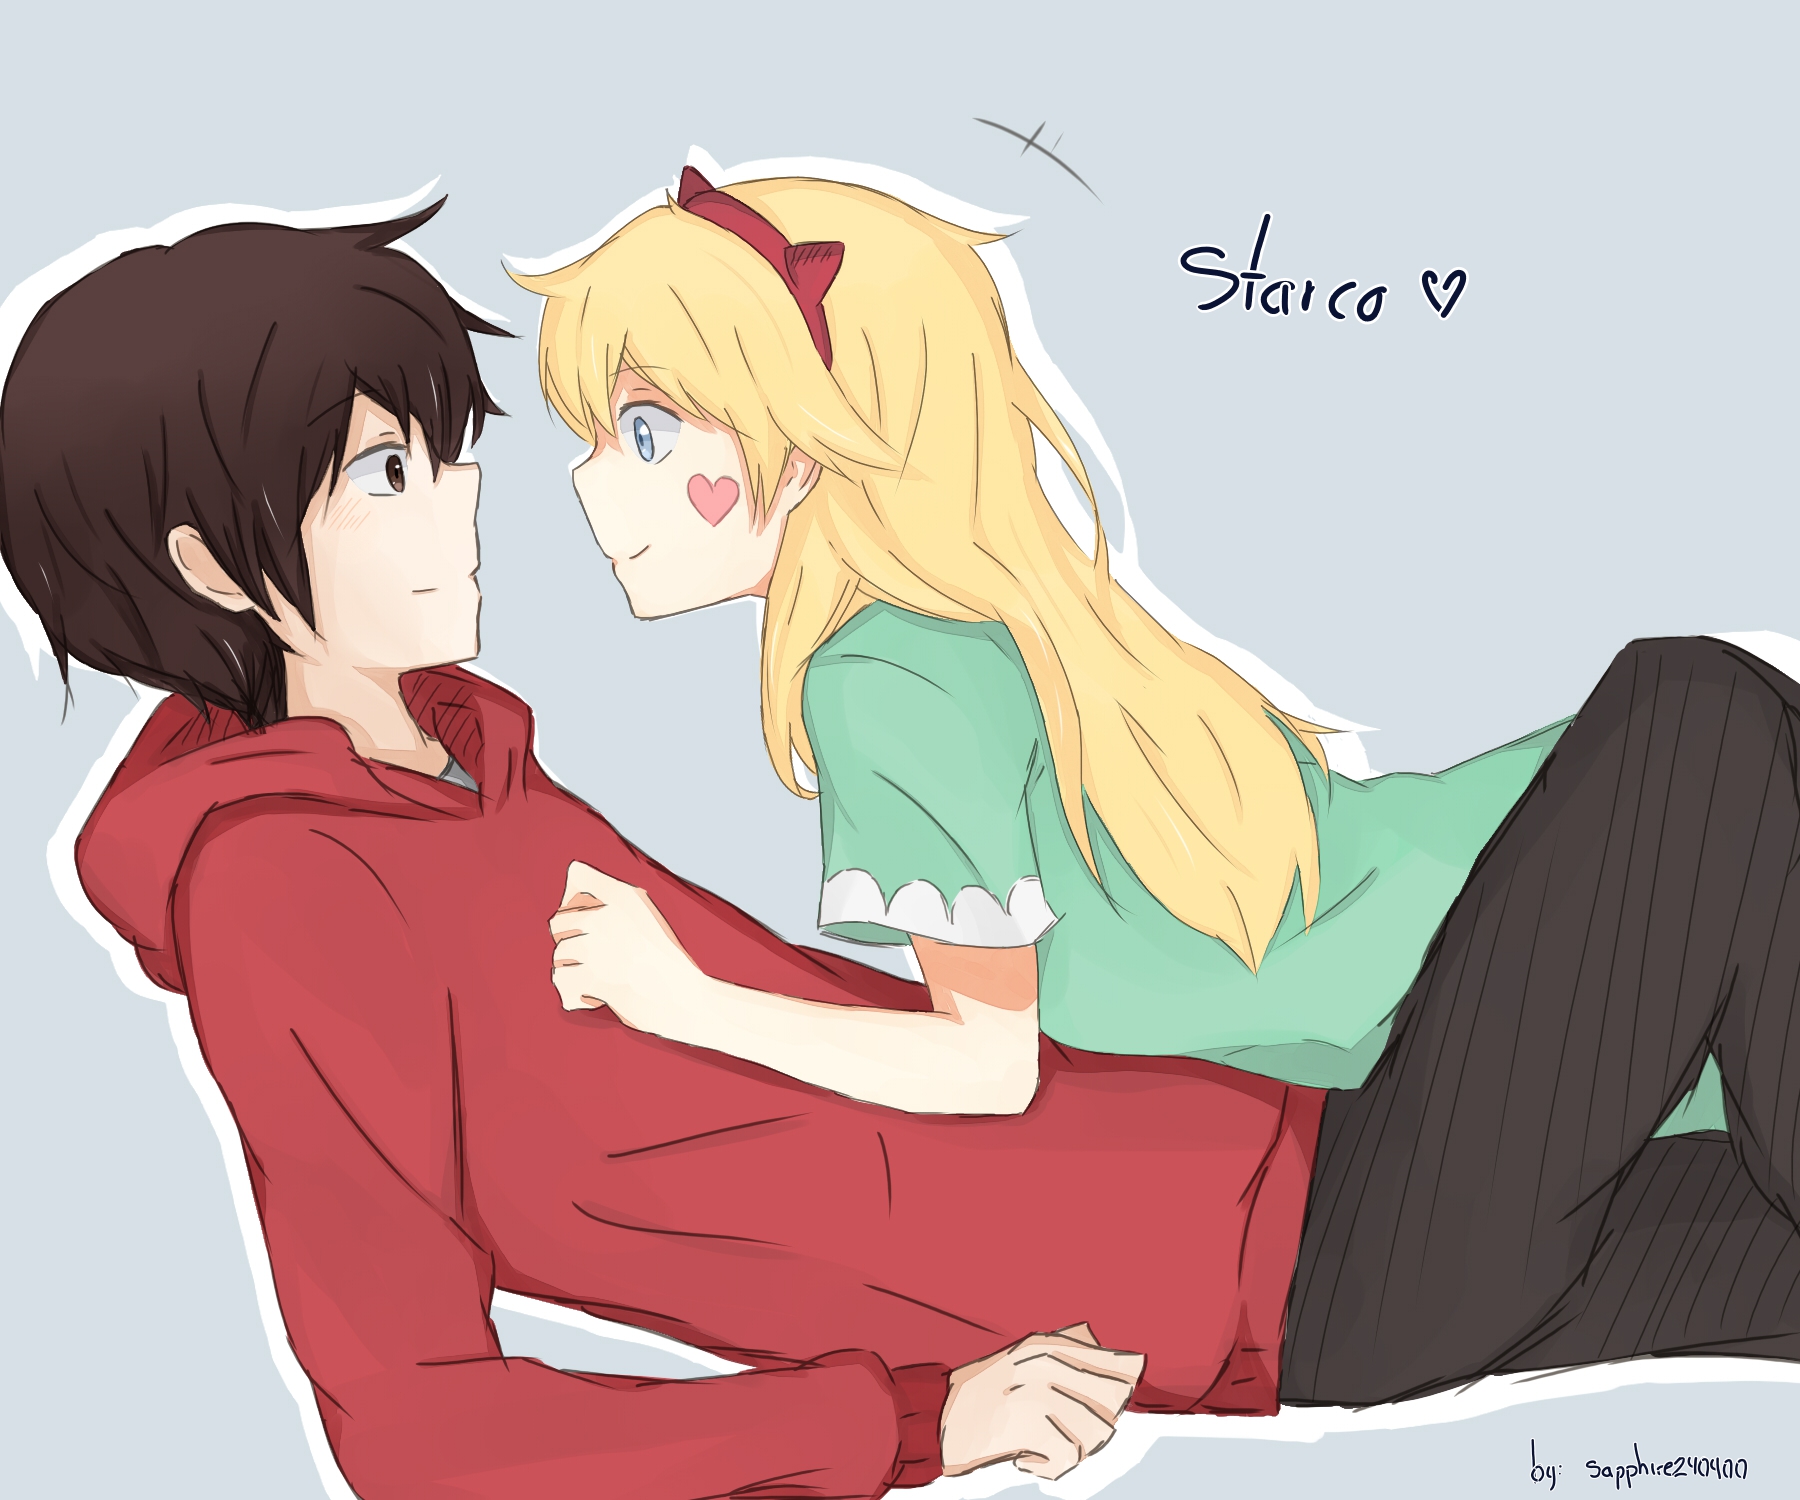 STARCO IS REAL!